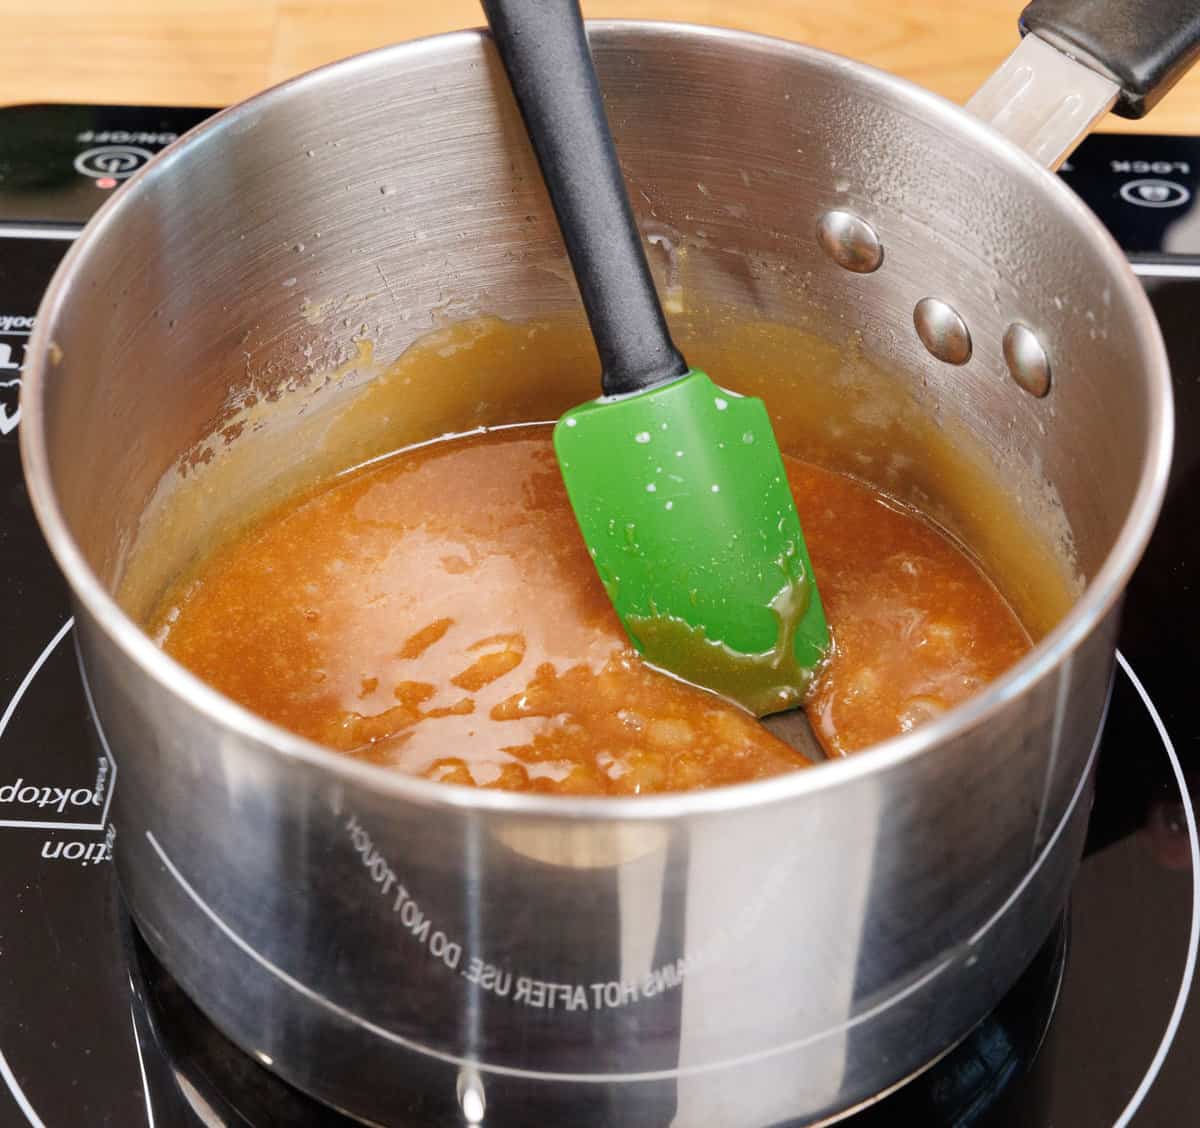 A pot of caramel on the stove